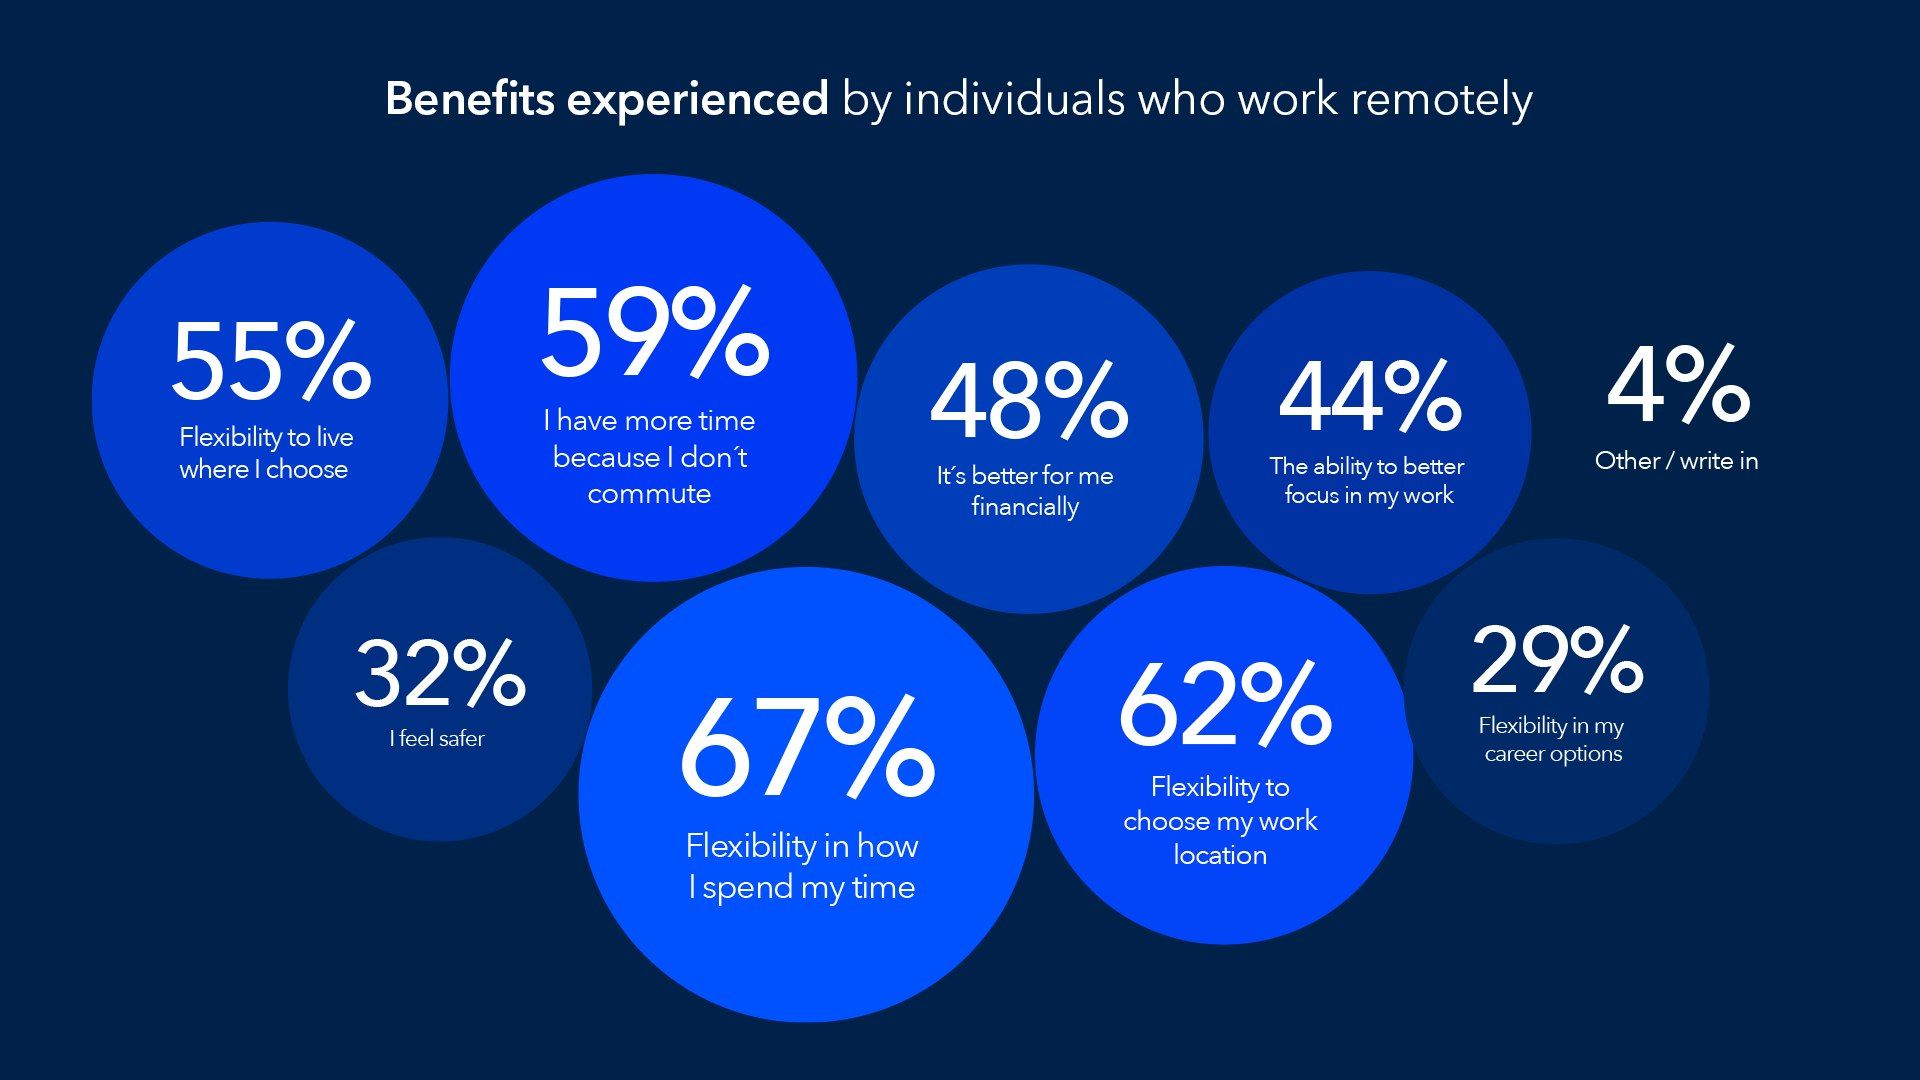 A list of benefits experienced by individuals who work remotely